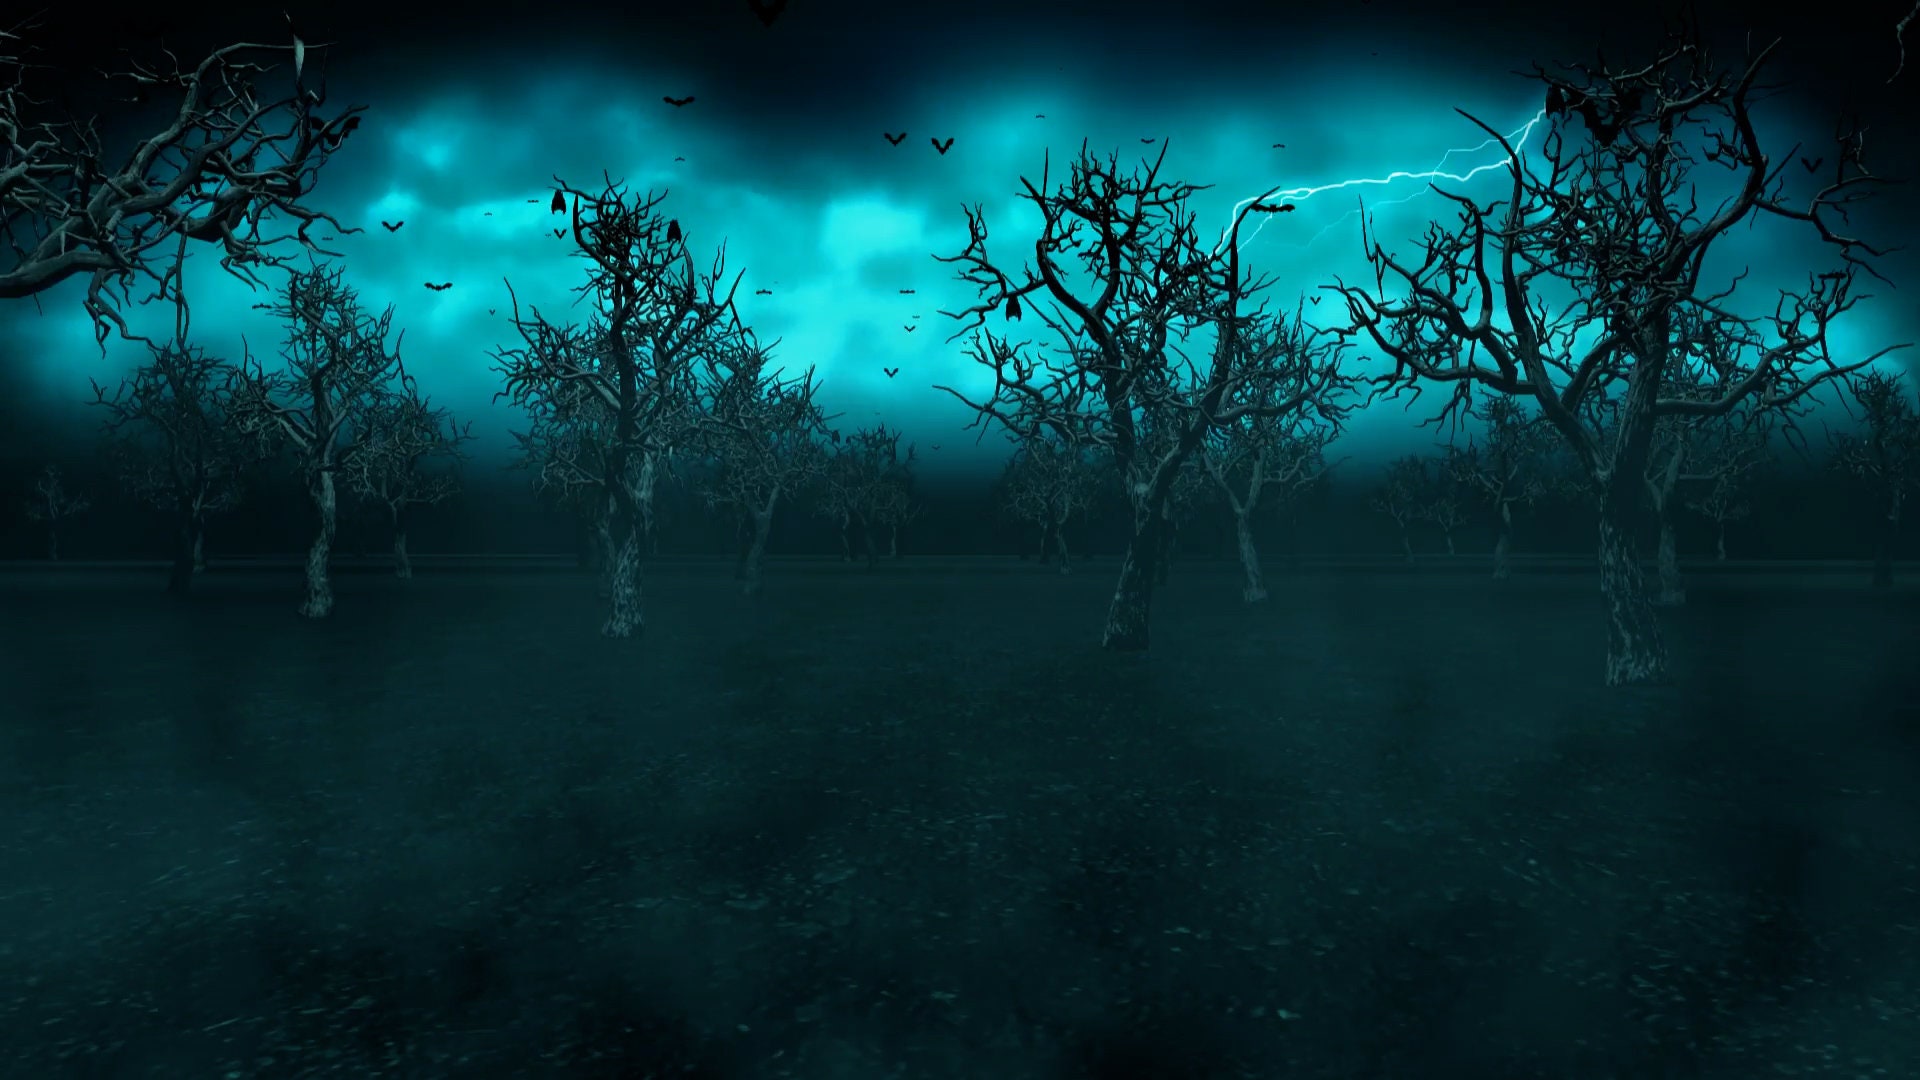 Halloween Video Clip Full HD 1920x1080p Video Animation for - Etsy Finland